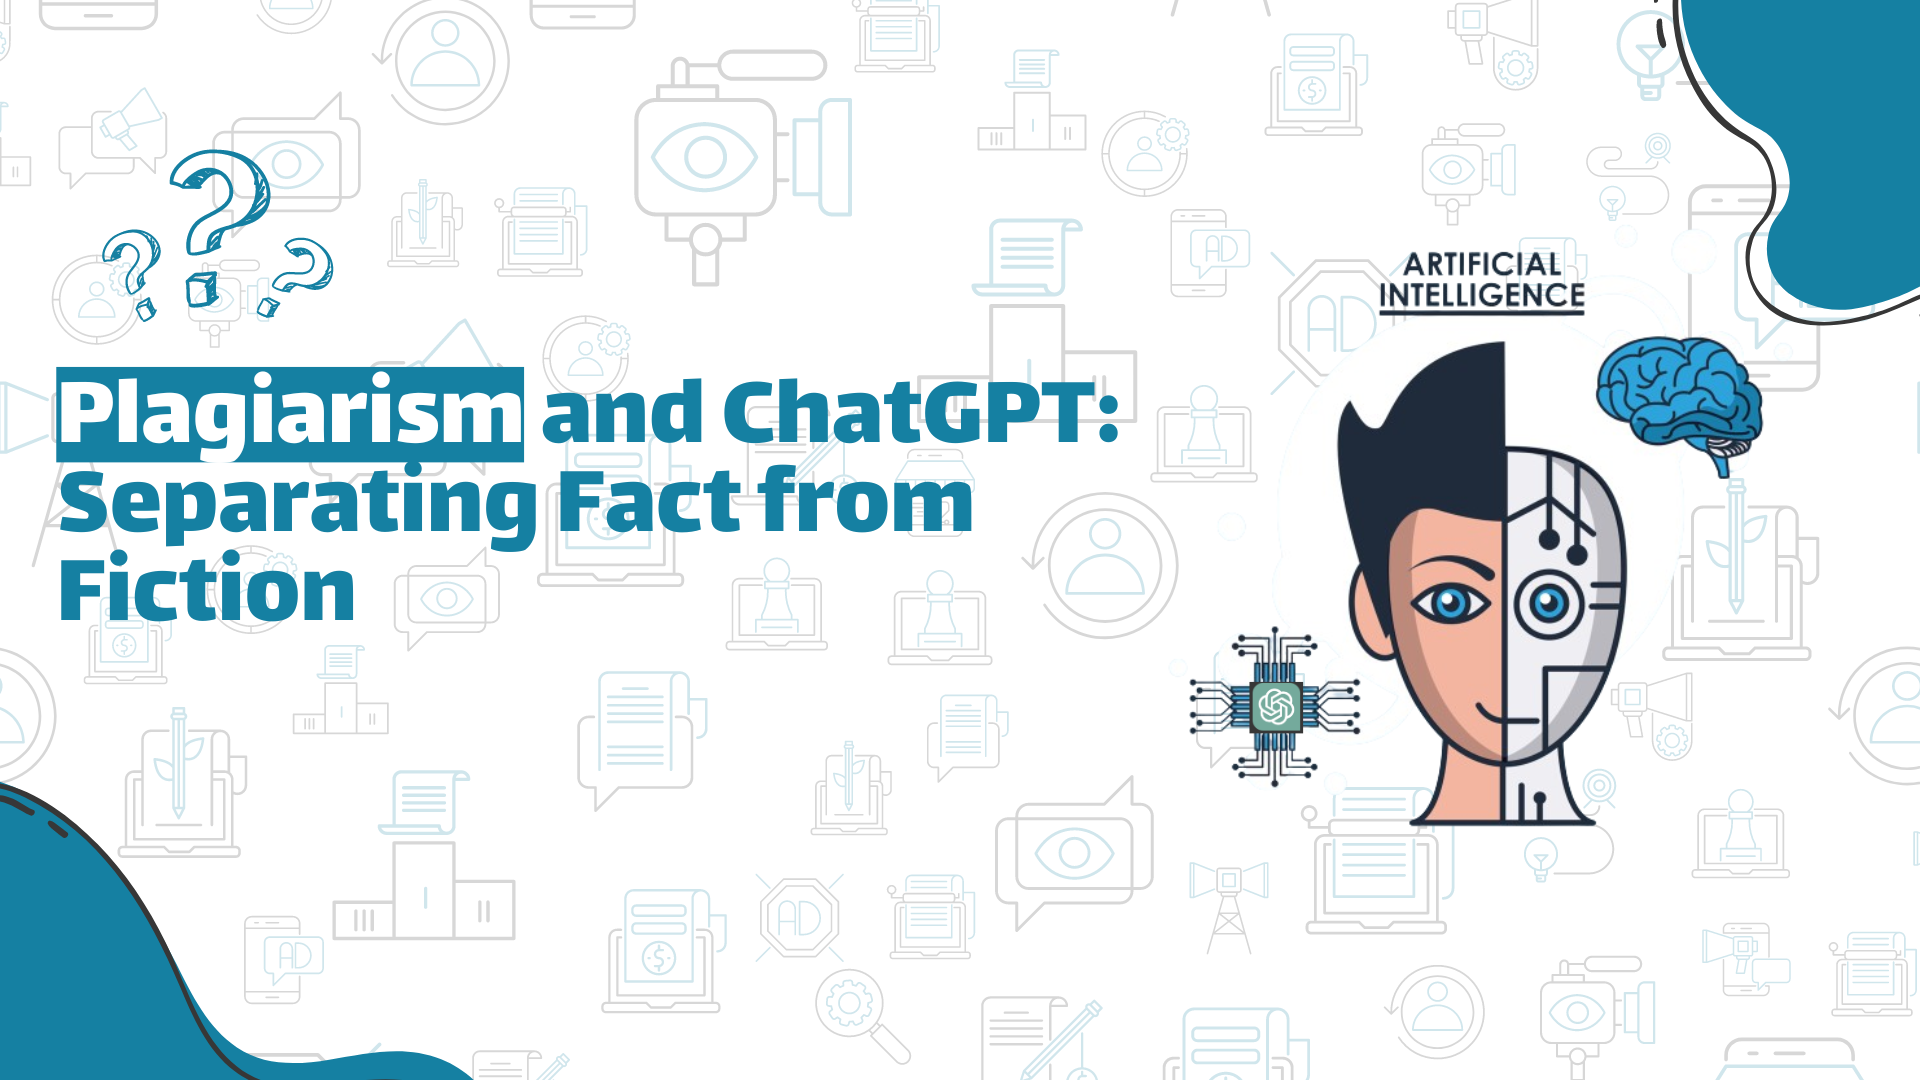 Plagiarism and ChatGPT: Separating Fact from Fiction